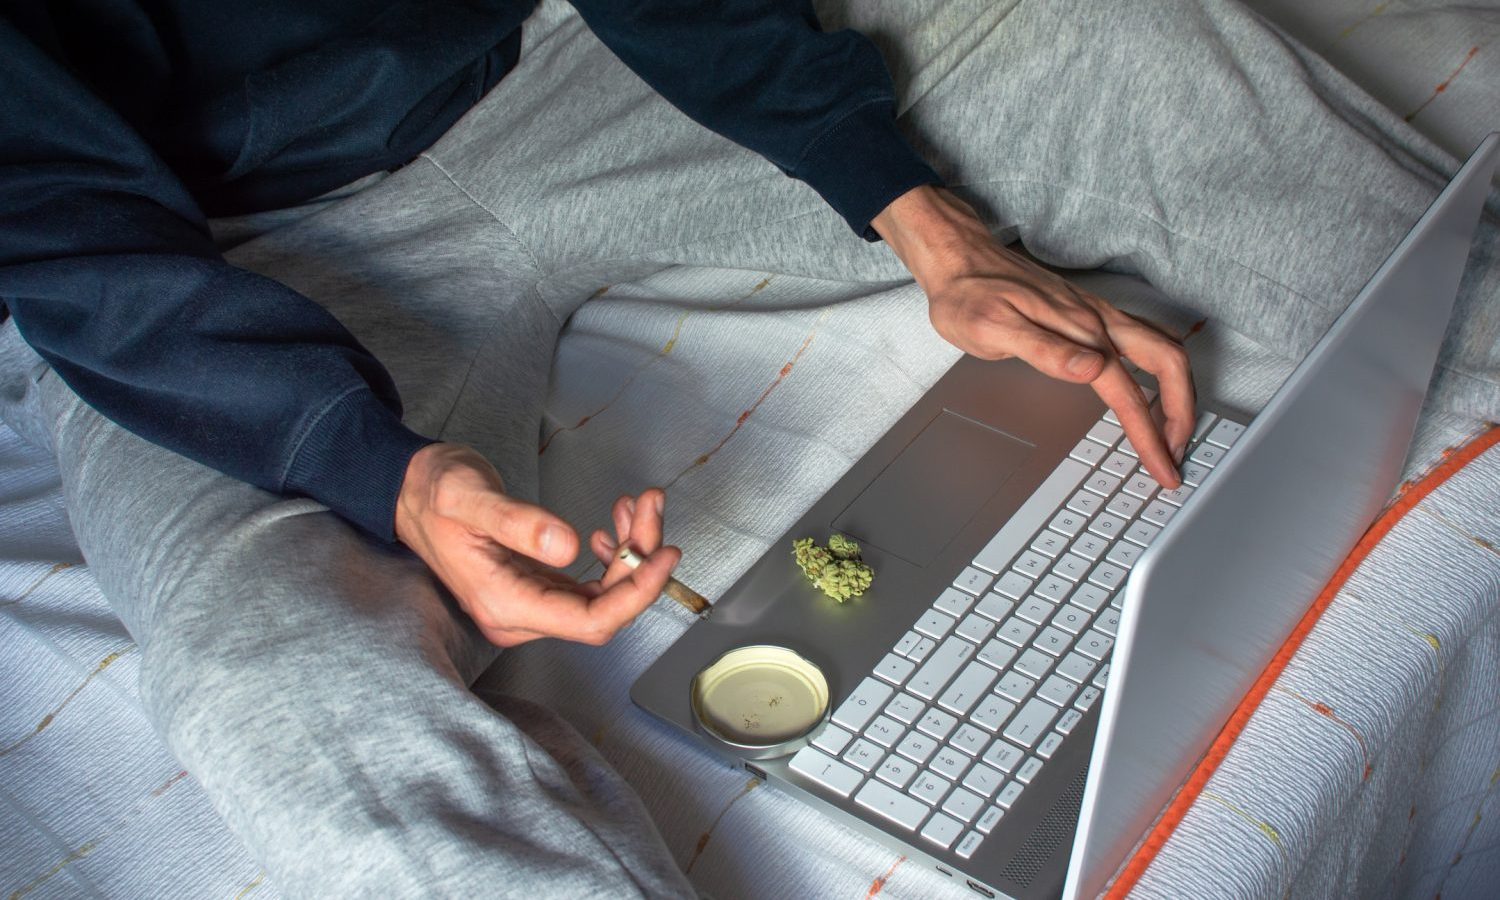 Forgo The Wake And Bake And Other Cannabis Productivity Hacks